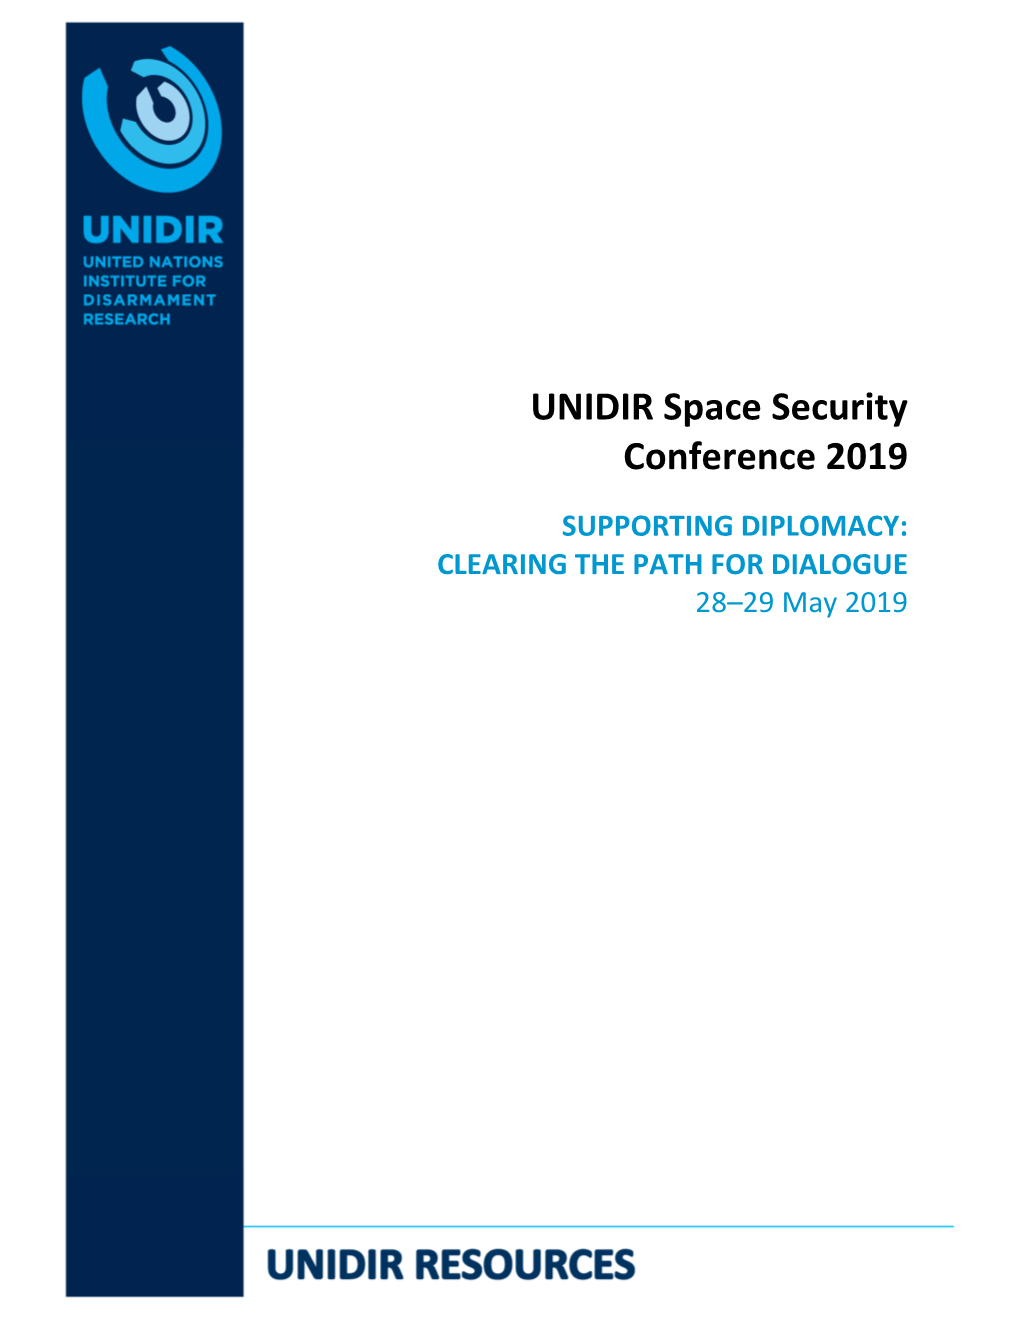 UNIDIR Space Security Conference 2019 Conference Report